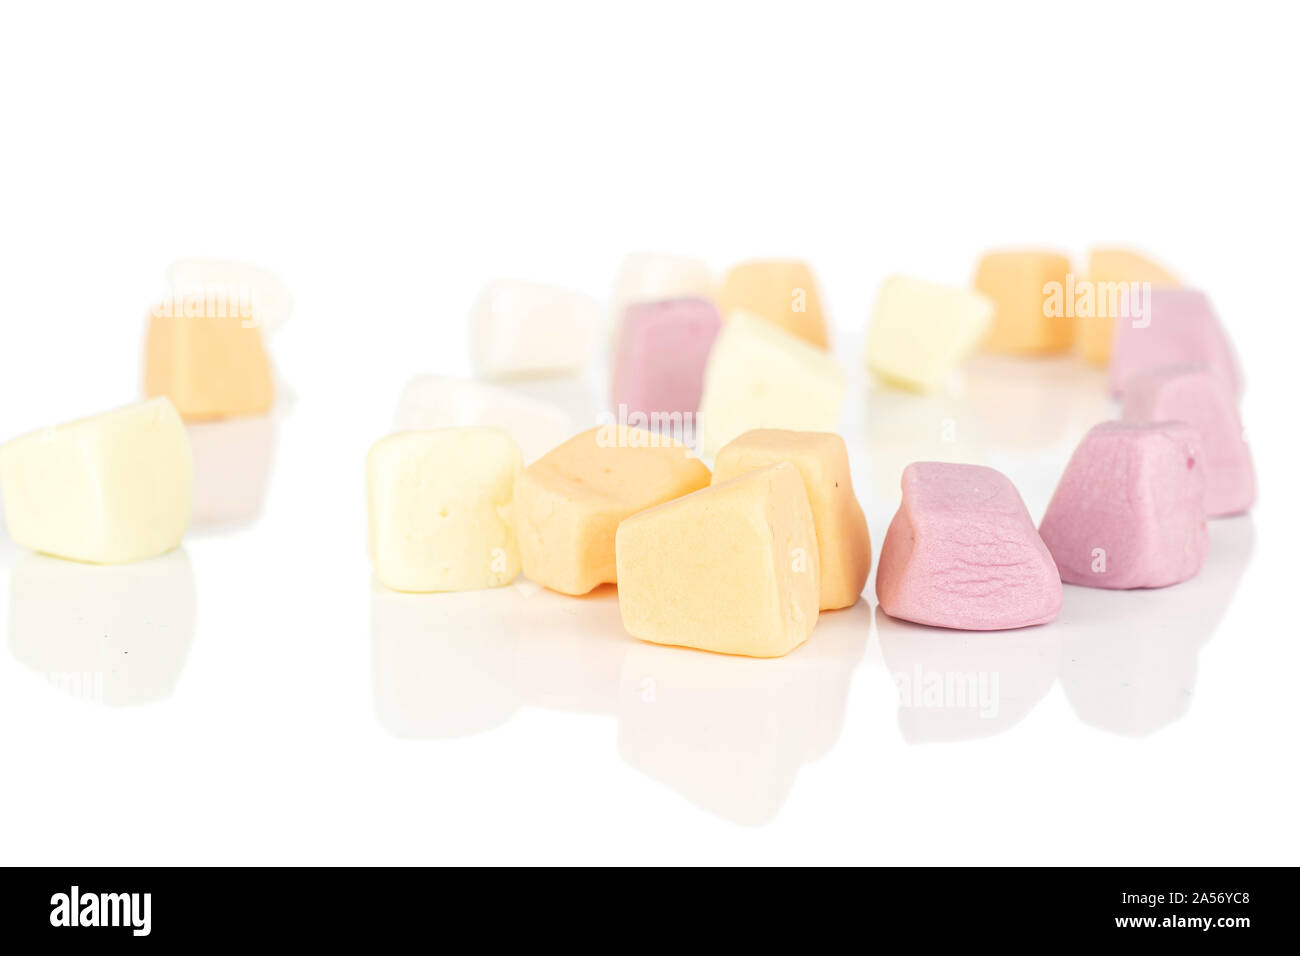 Lot of whole disordered soft pastel candy isolated on white background Stock Photo